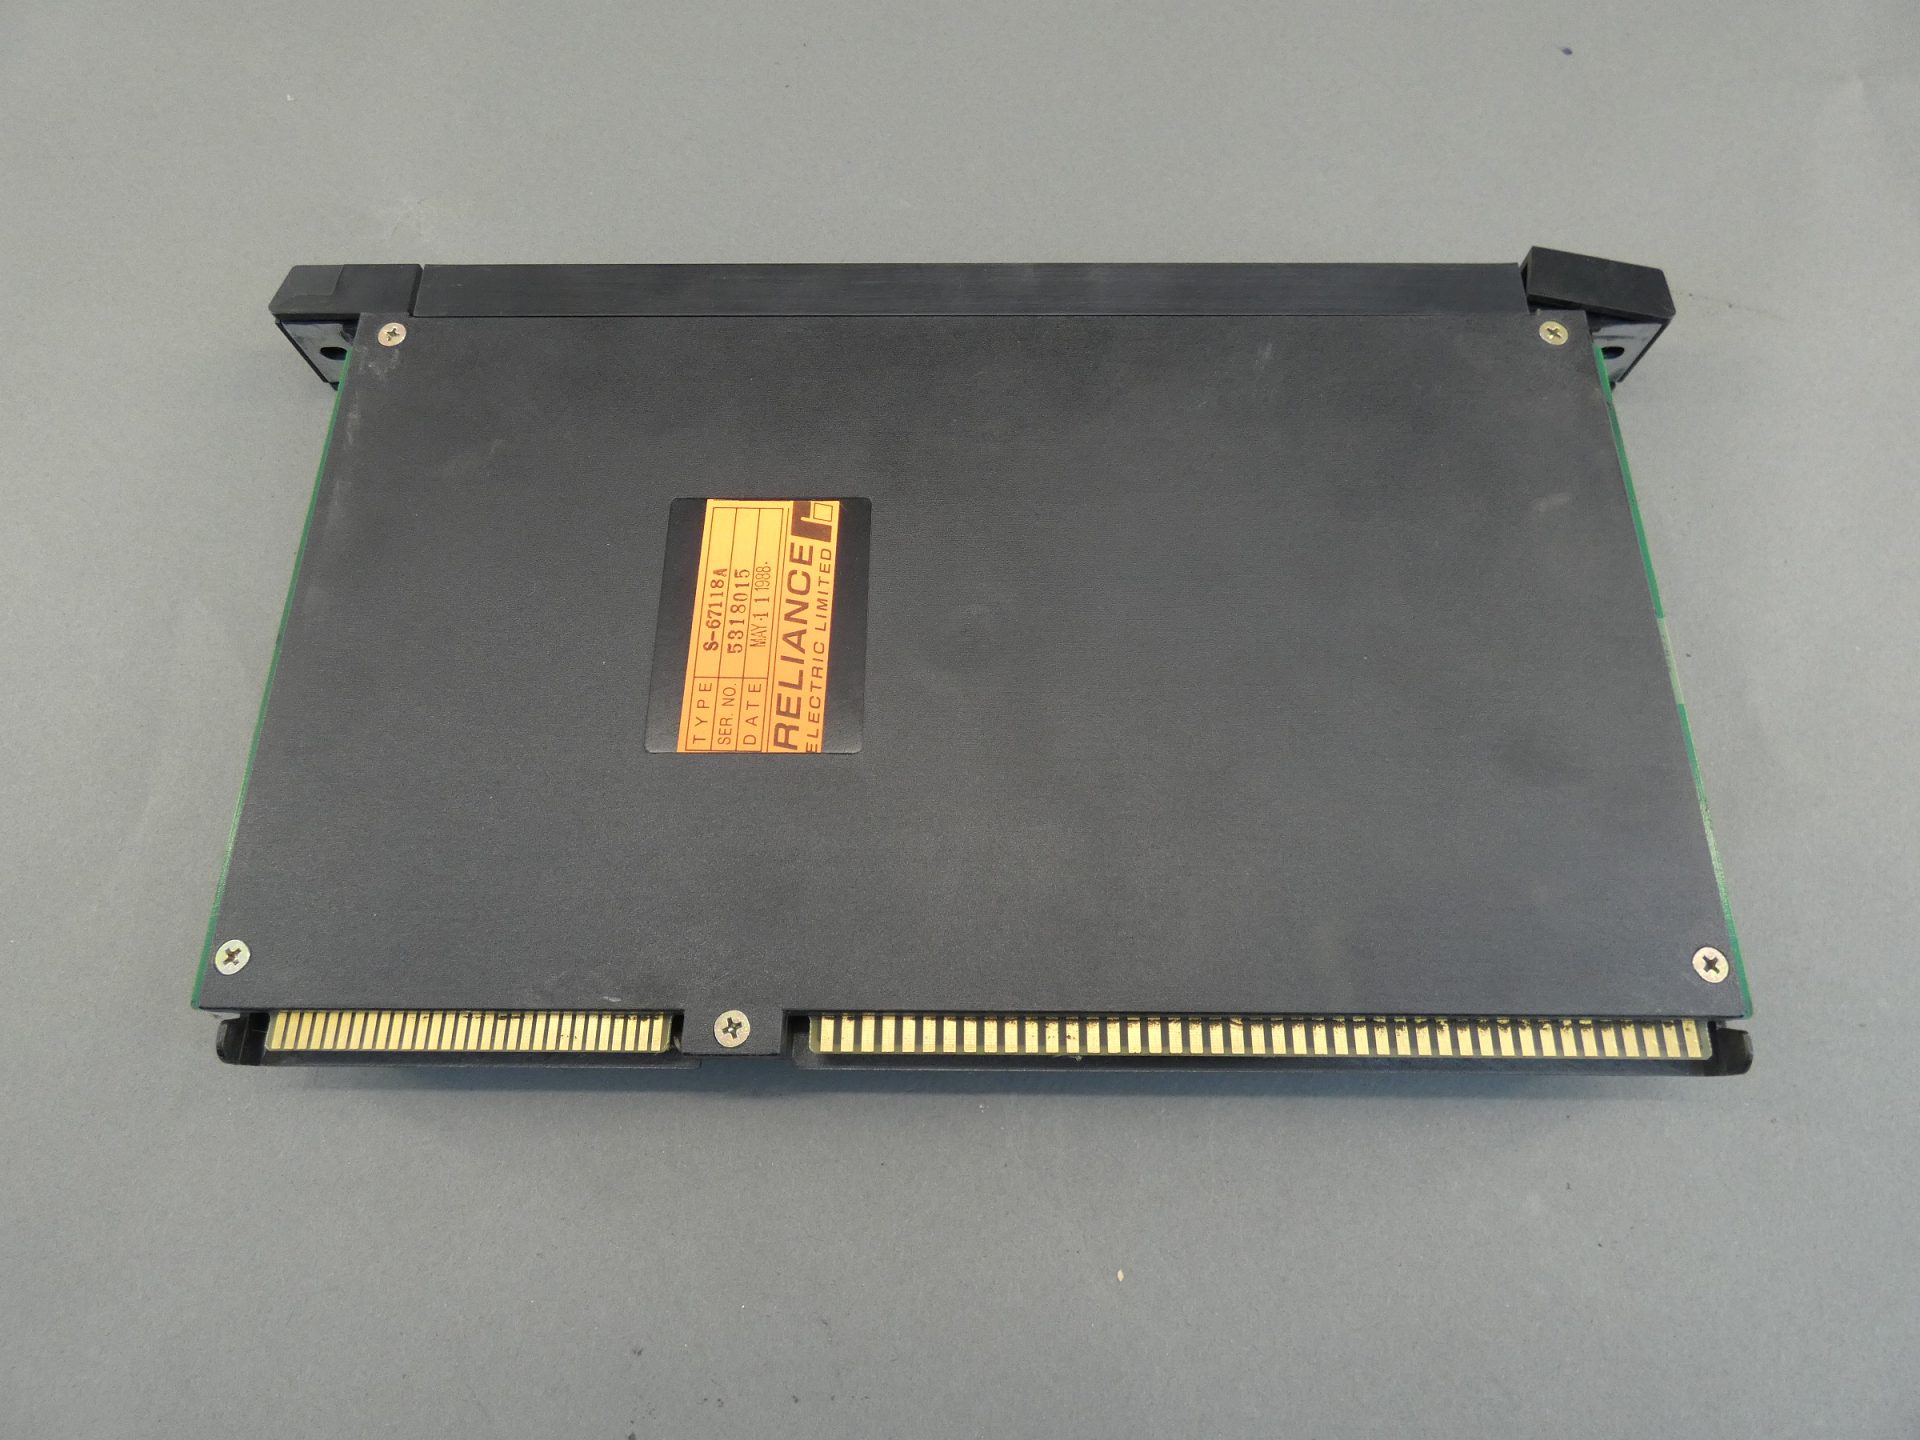 Details about   Reliance S-67118 Output Module Analog 